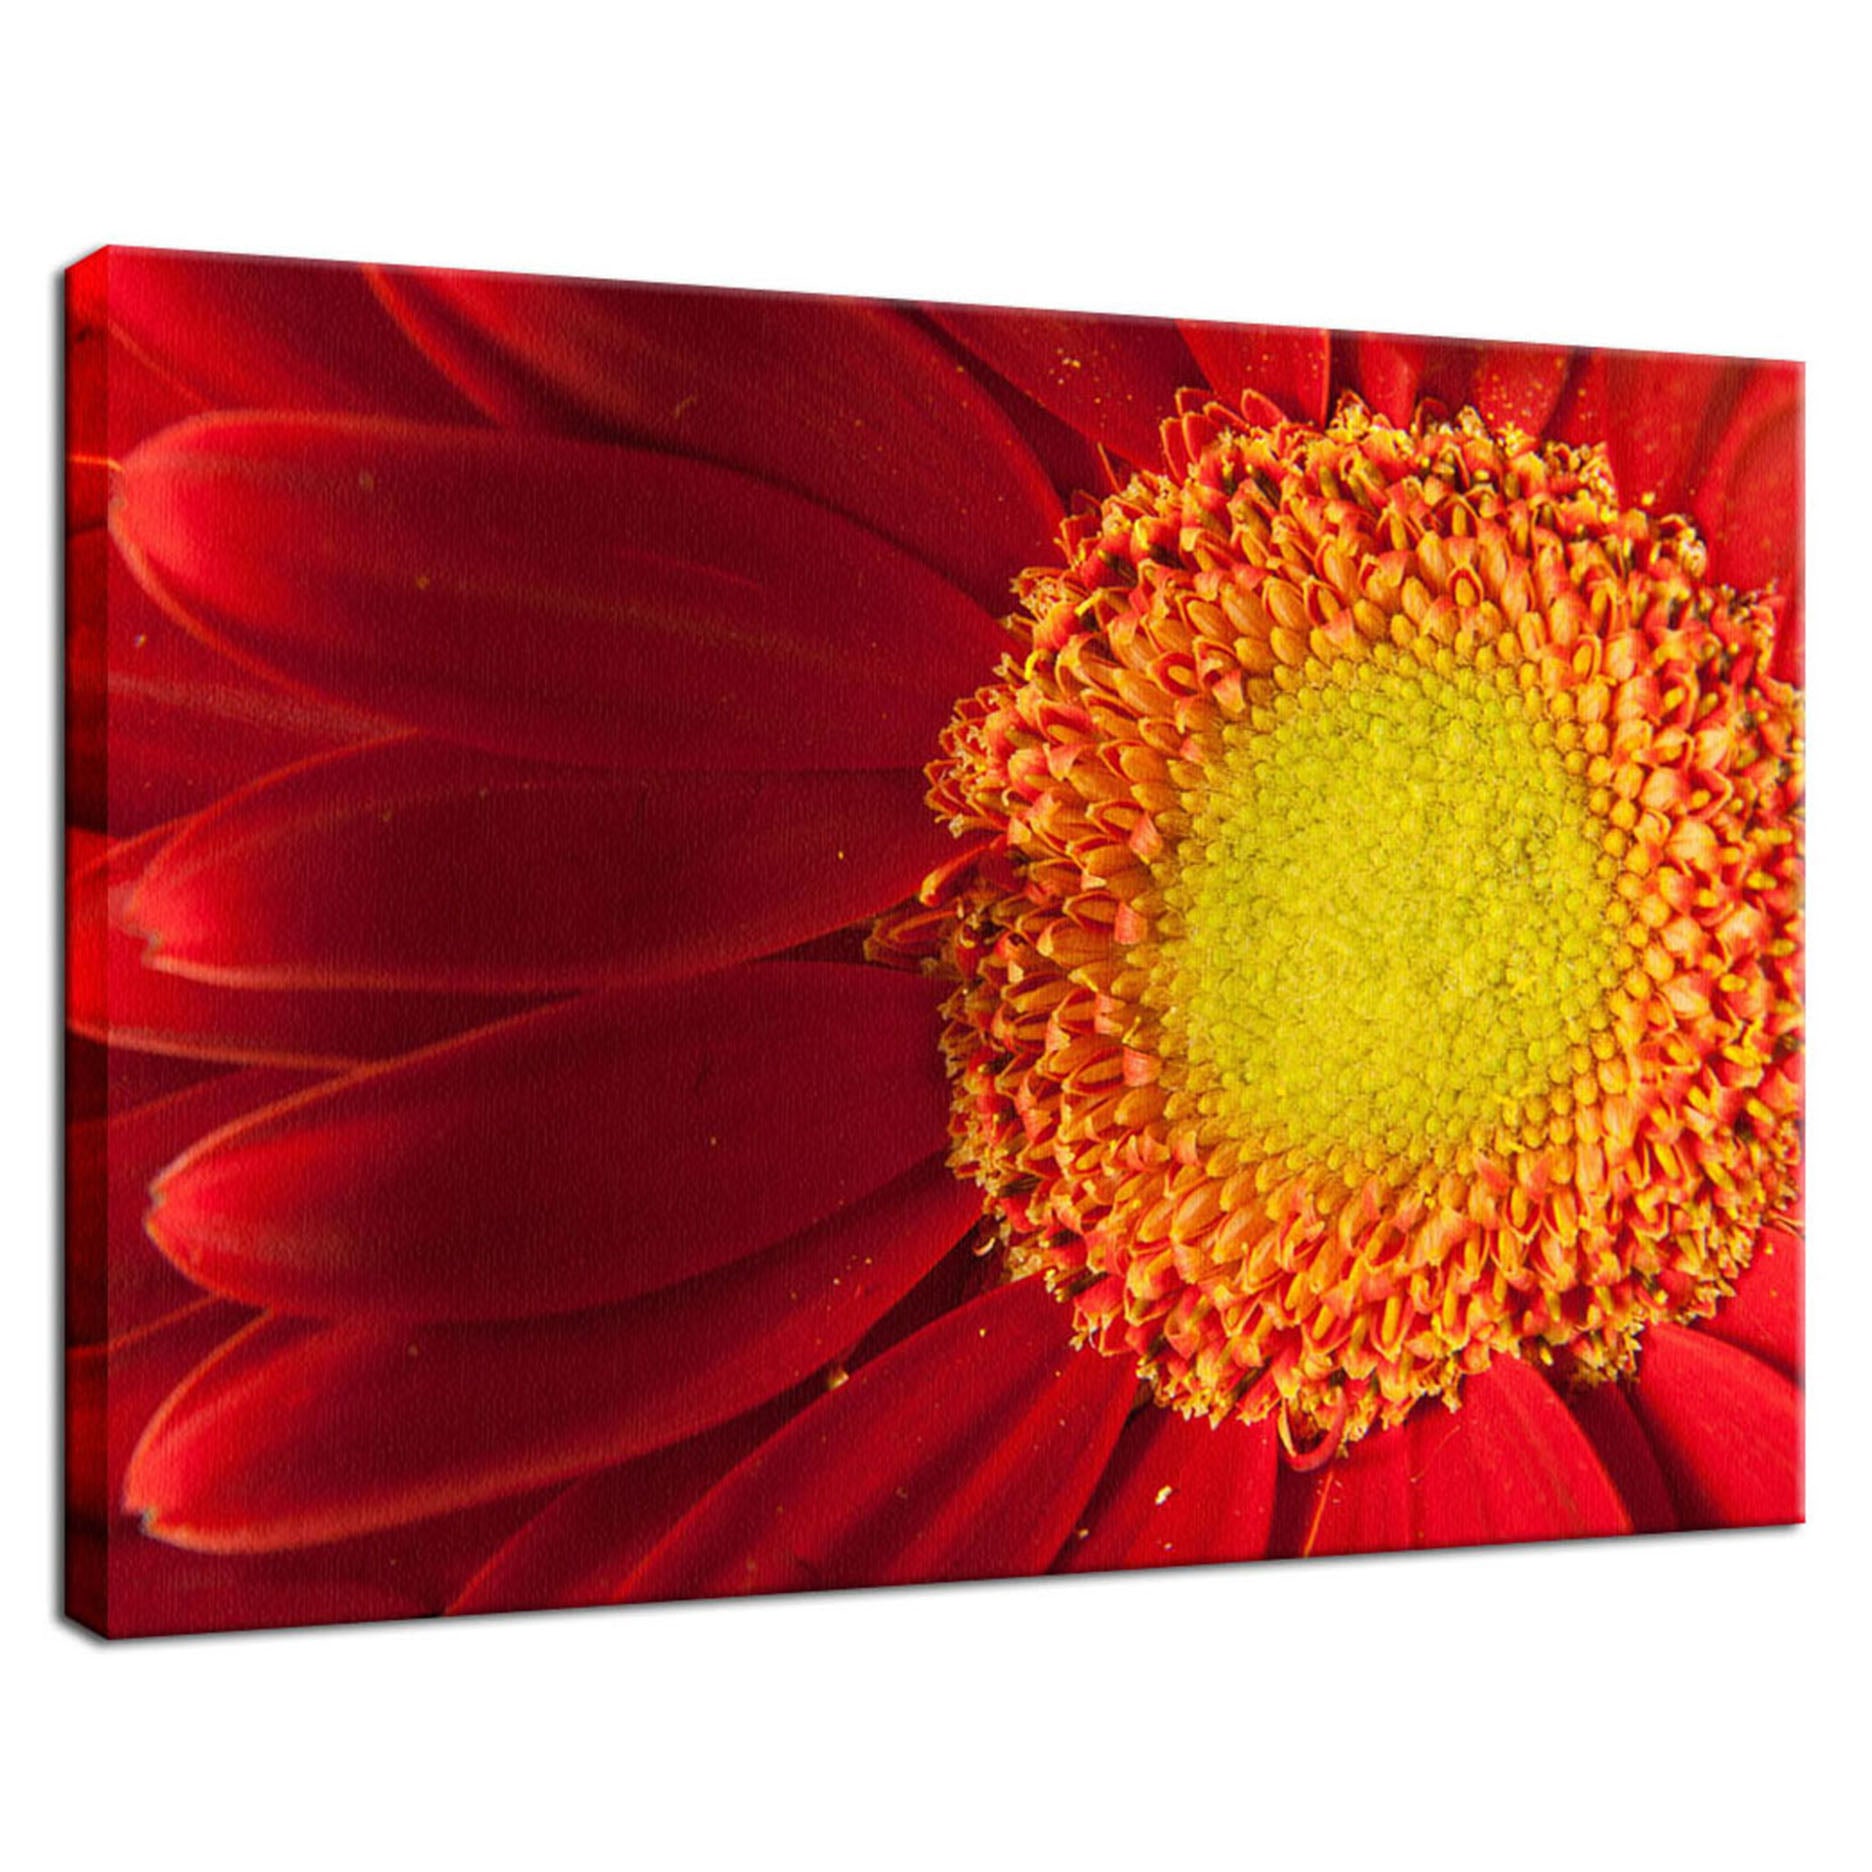 Nature's Beauty Nature / Floral Photo Fine Art Canvas Wall Art Prints  - PIPAFINEART